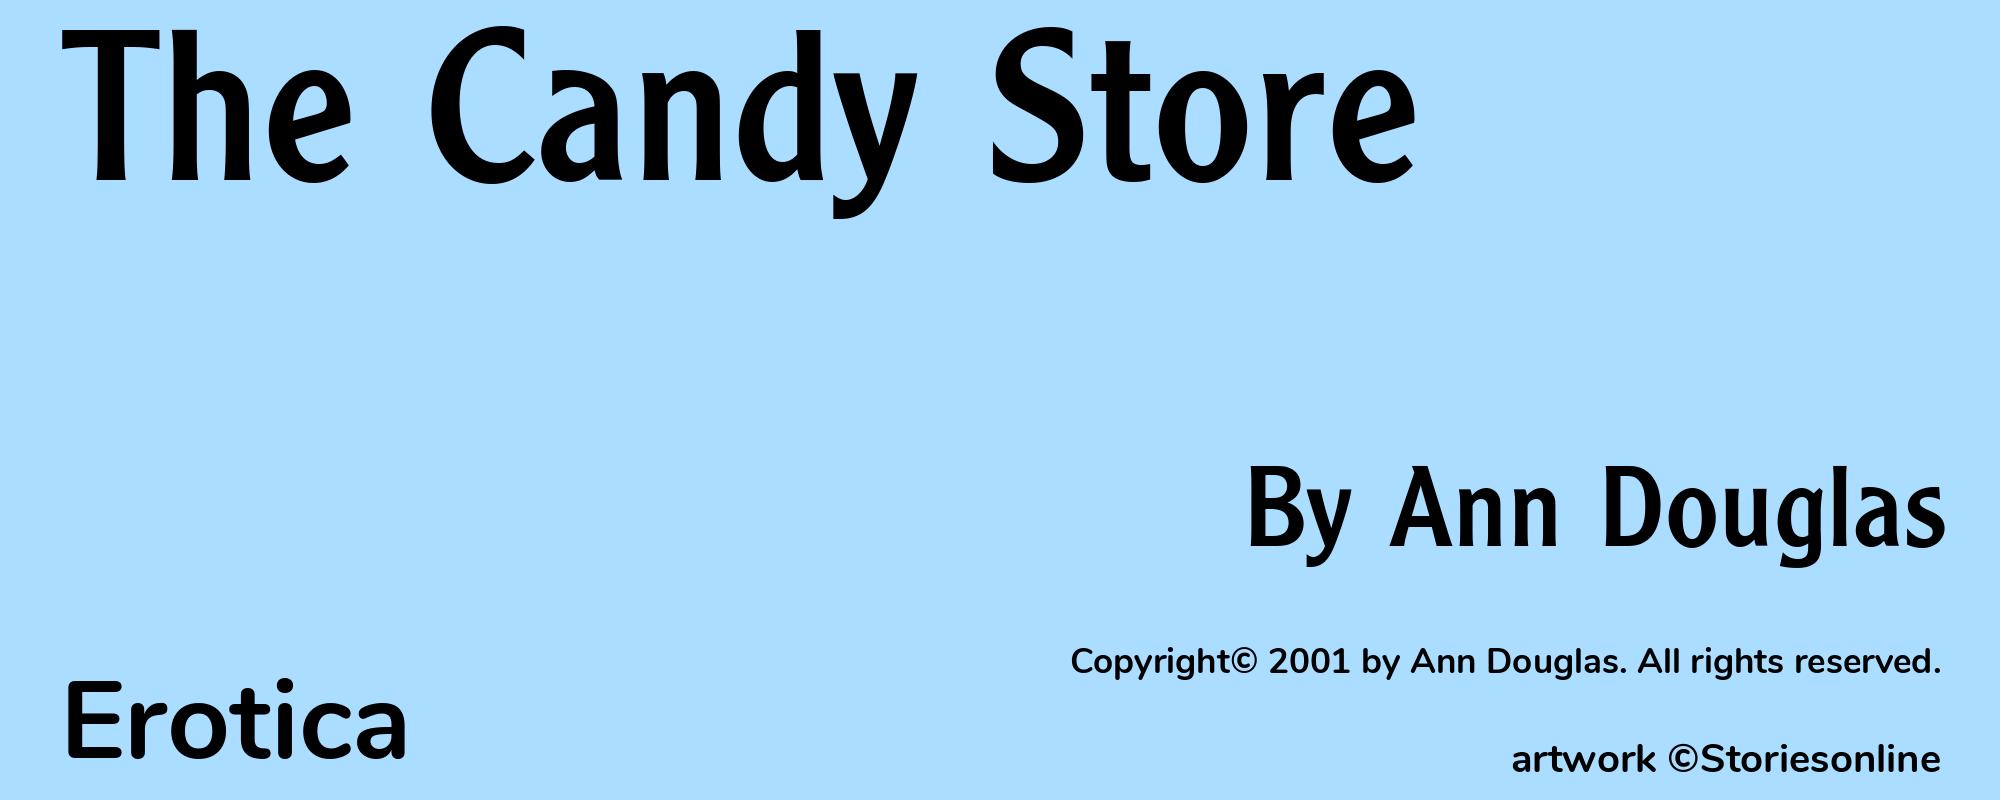 The Candy Store - Cover